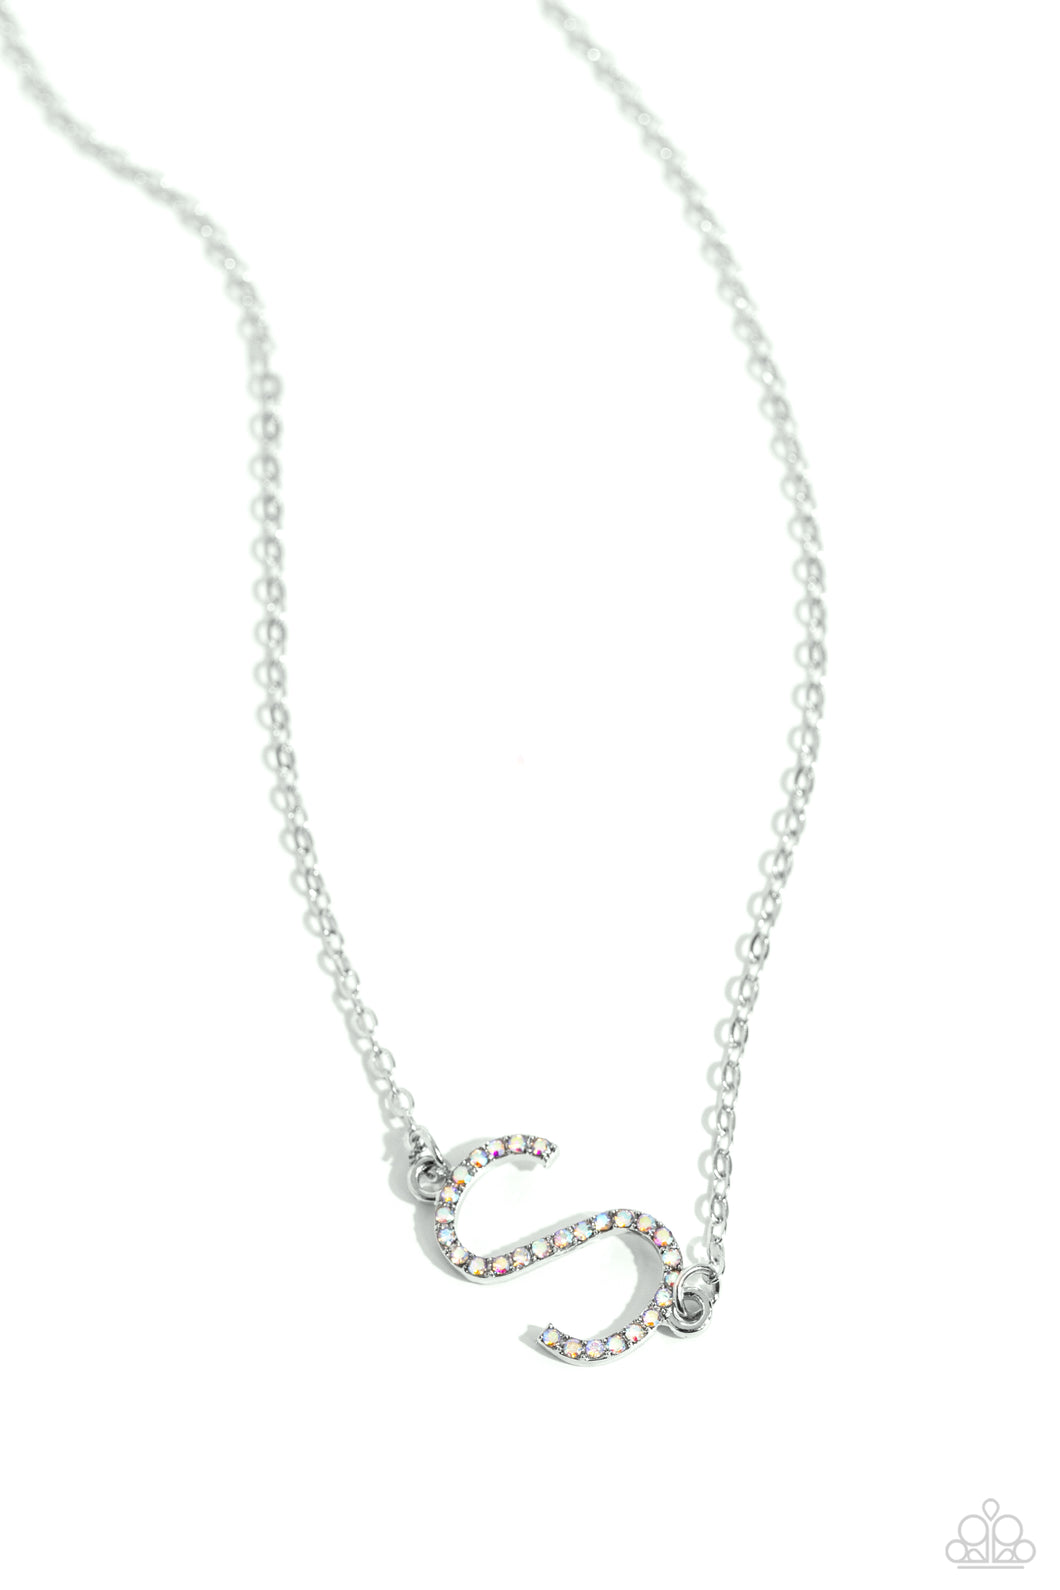 INITIALLY Yours - S - Multi Necklace - Paparazzi - Dare2bdazzlin N Jewelry